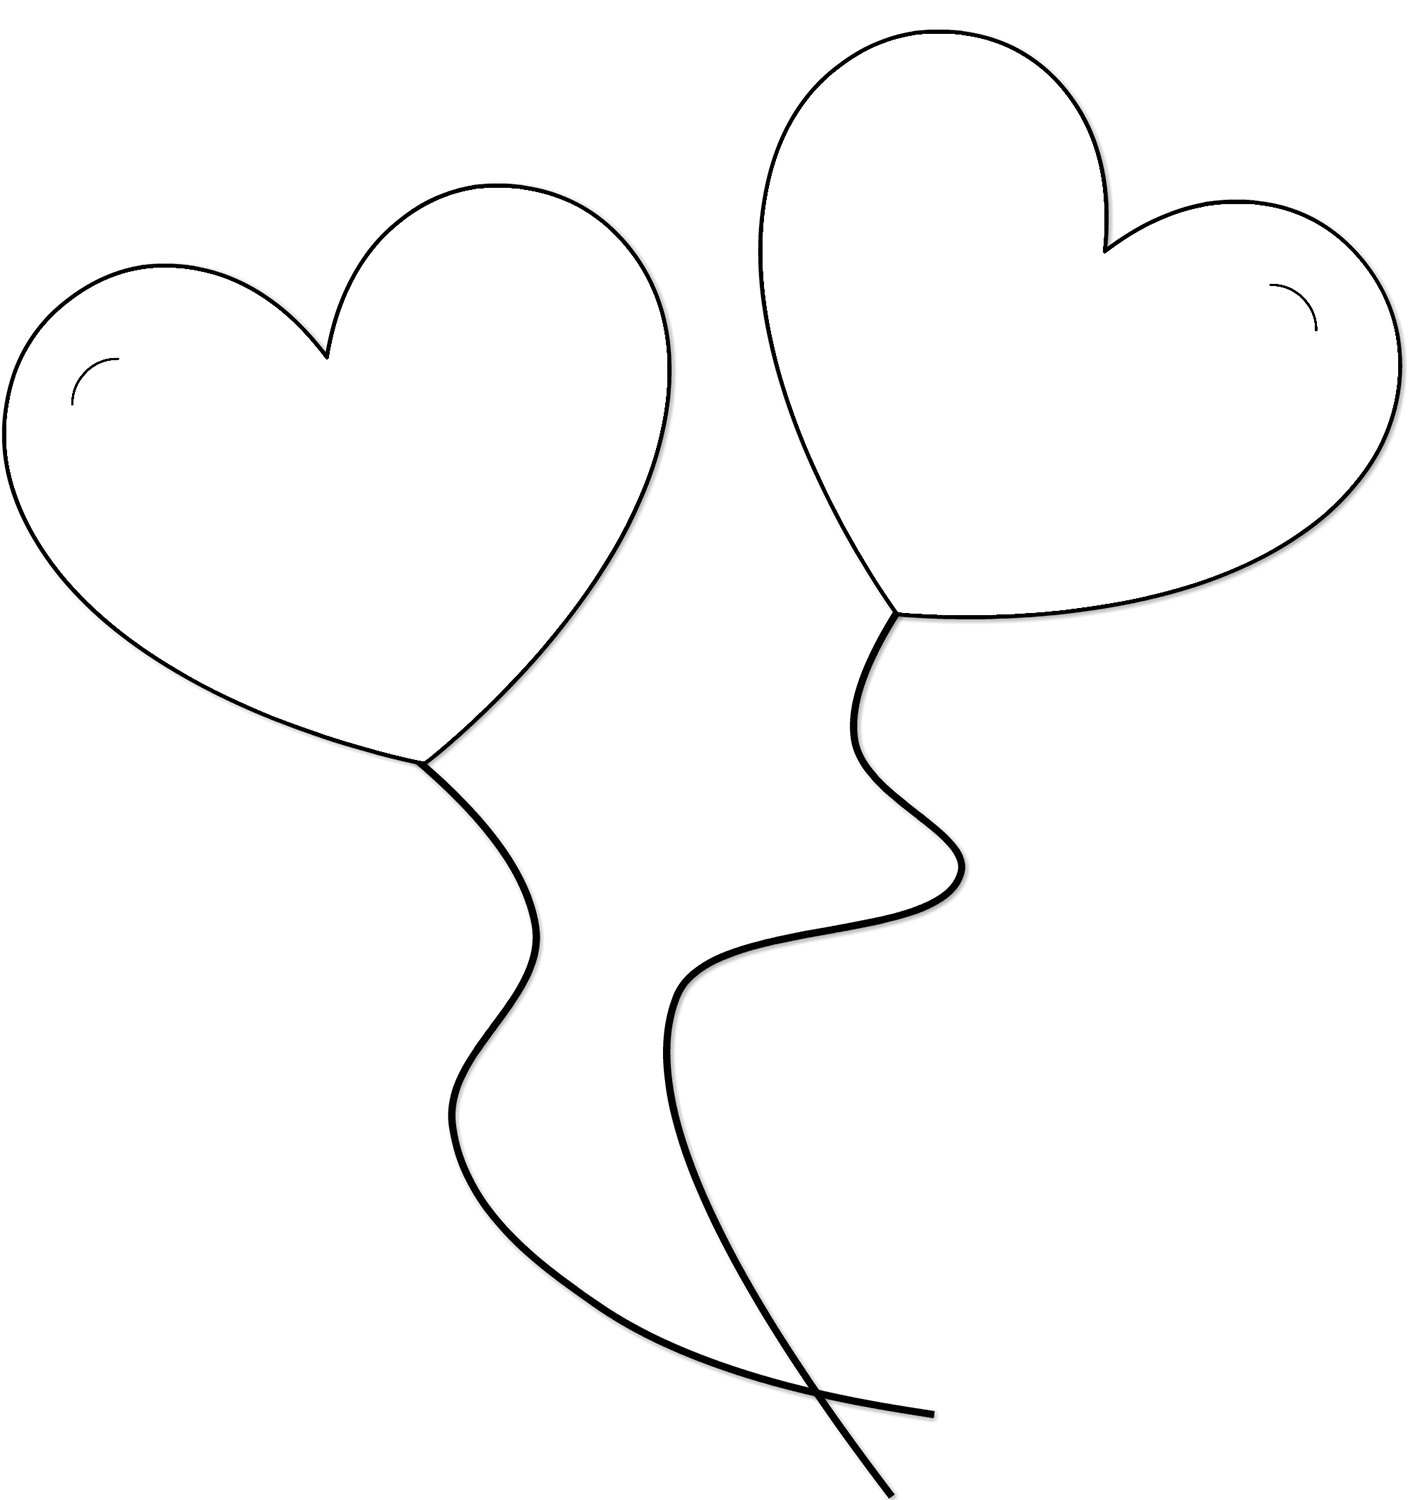 Two Heart Shaped Balloons Coloring Page Coloring Page